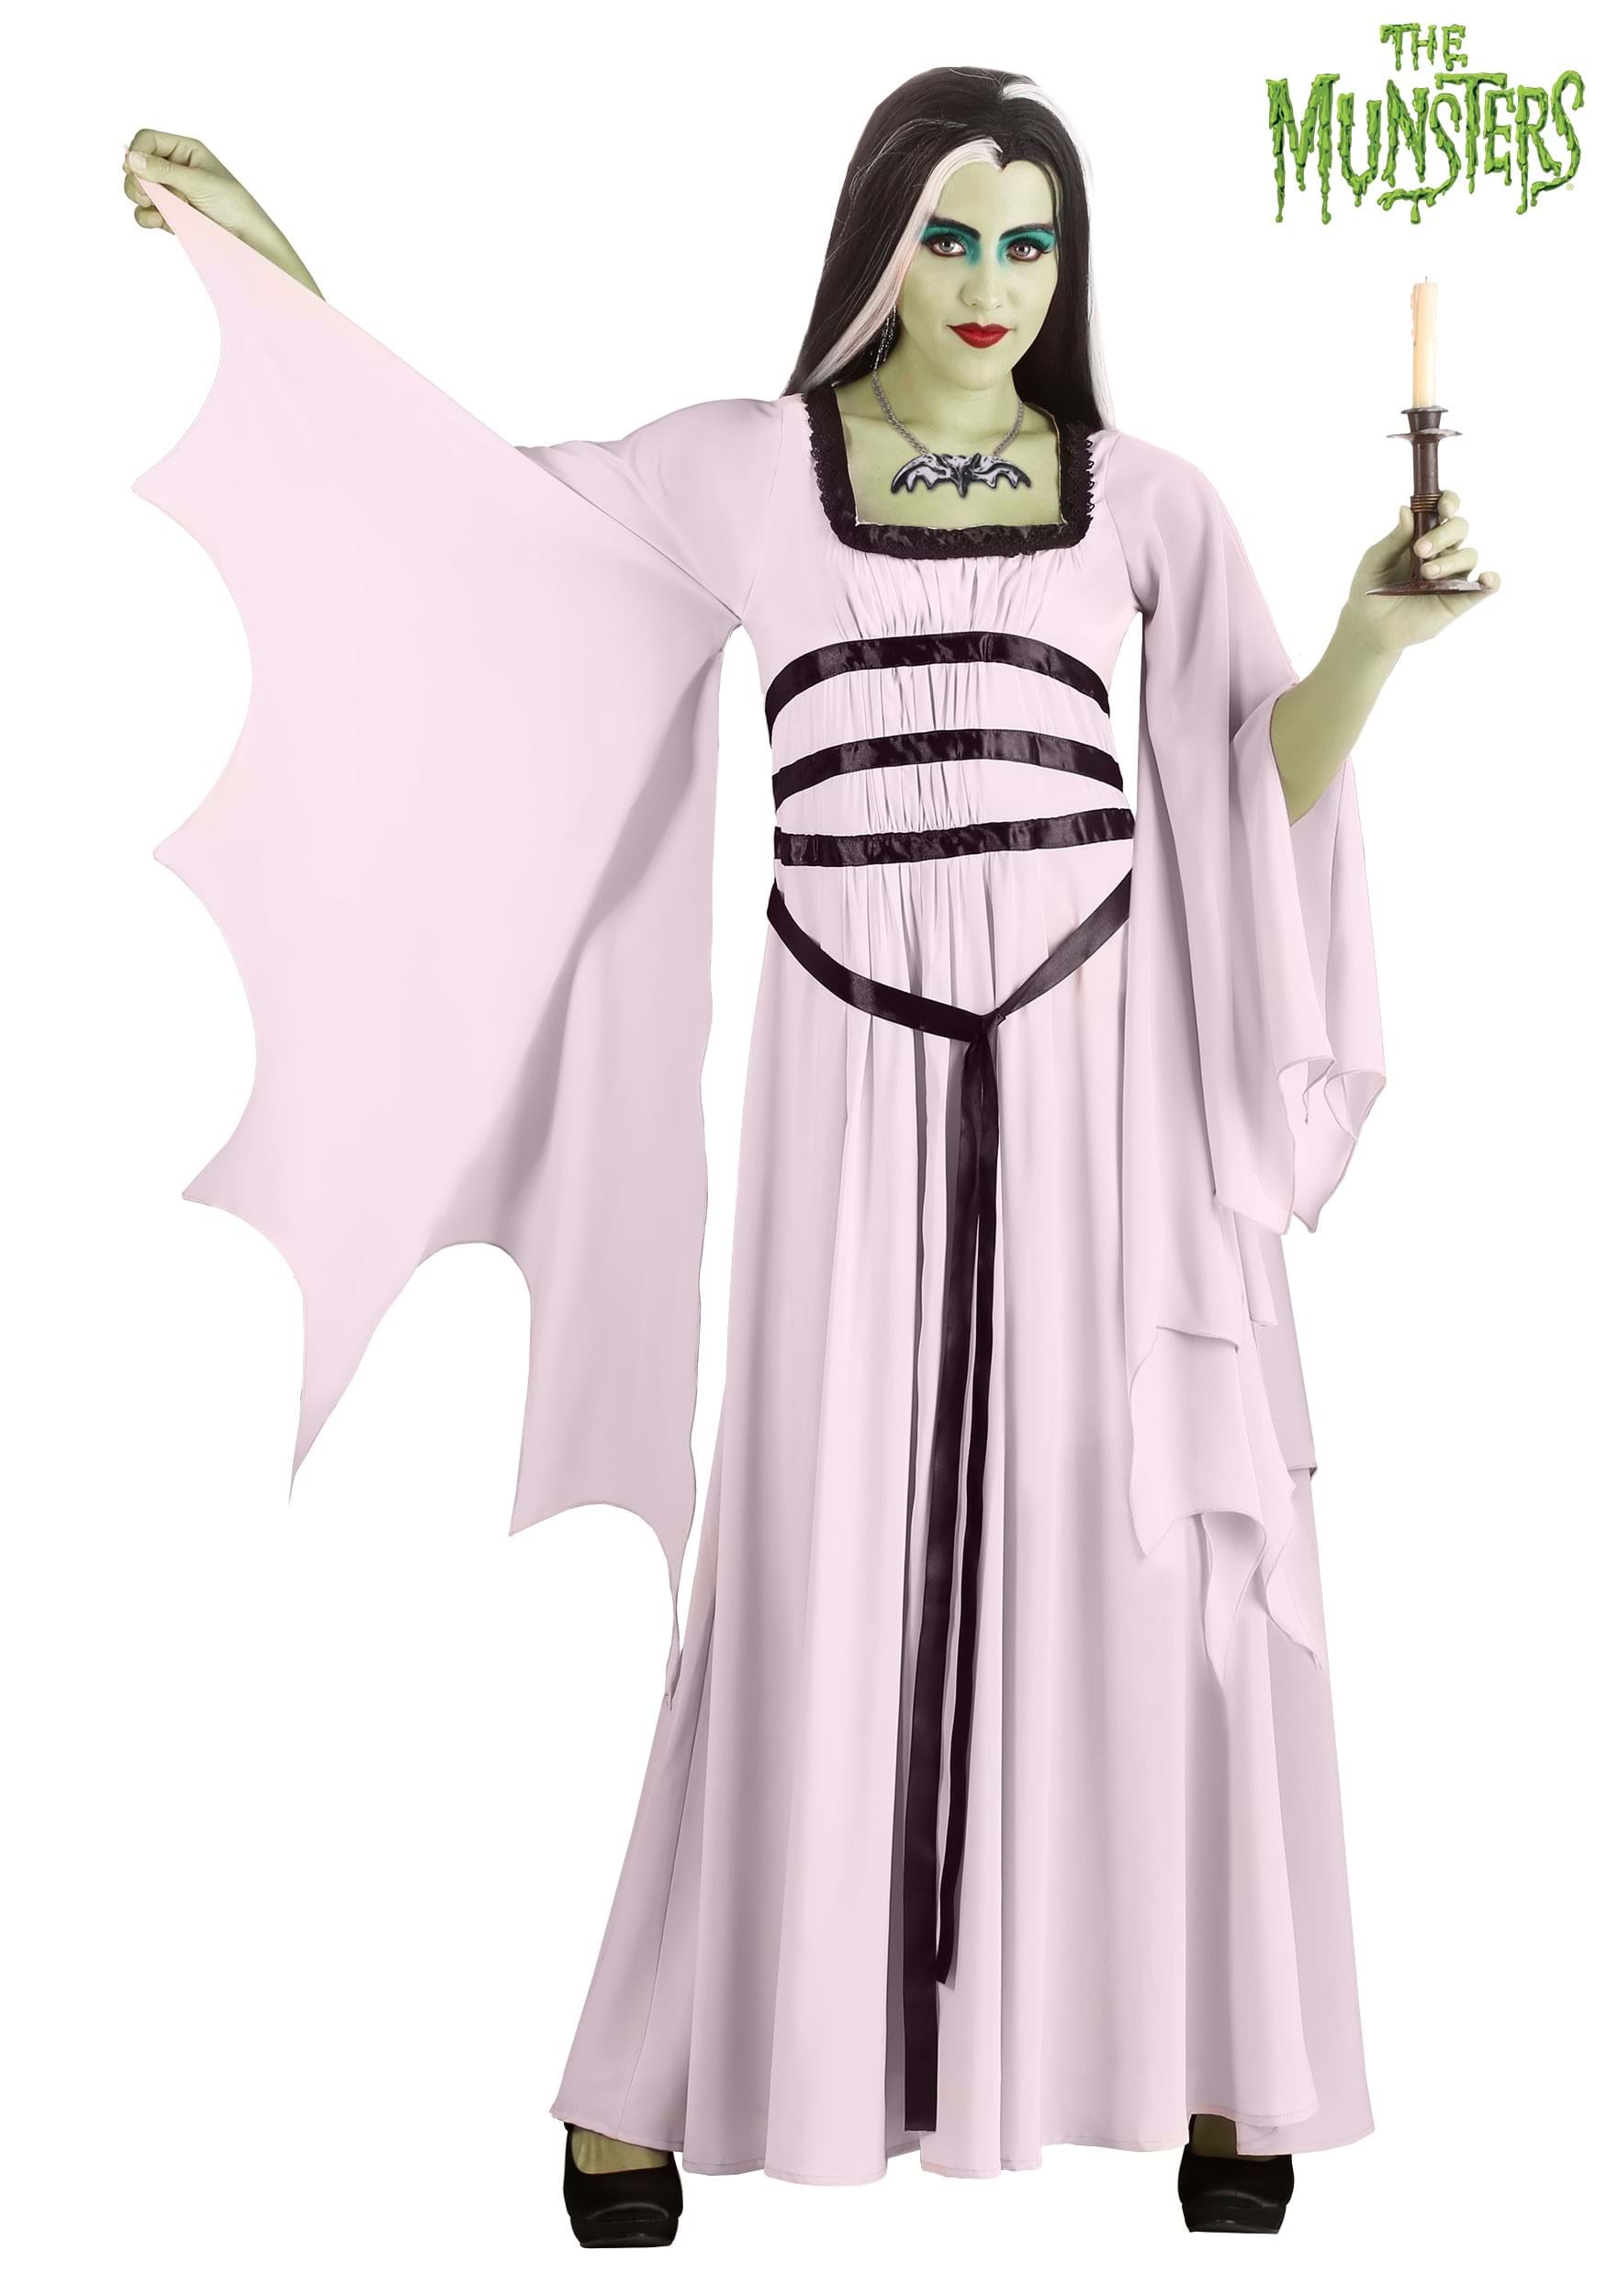 Lily munster cape